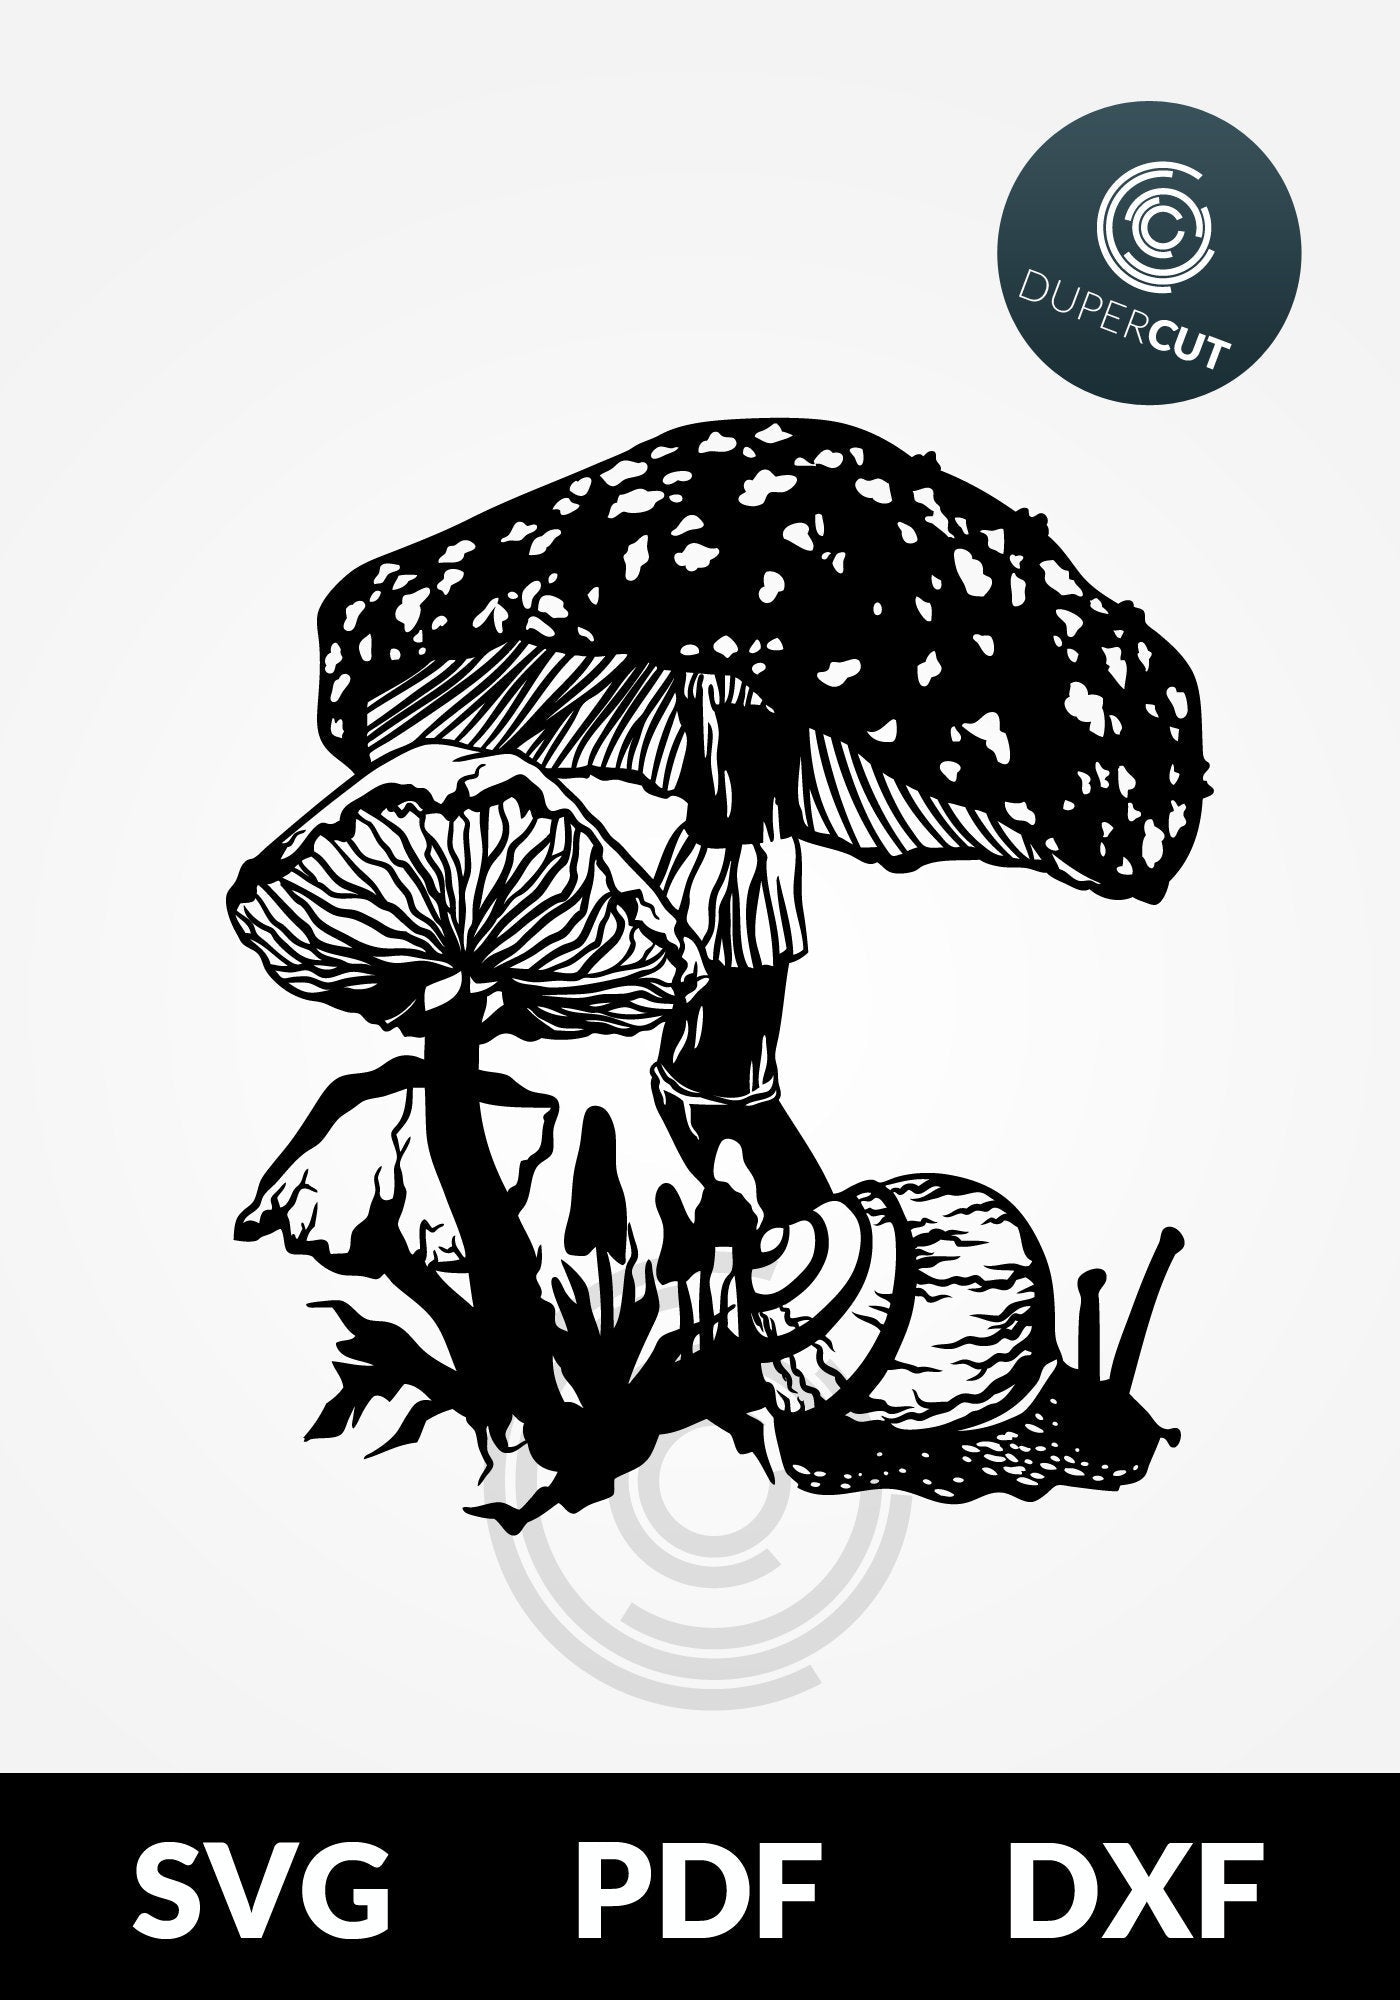 Mushrooms black and white Illustration SVG JPEG DXF files. Template for paper cutting, laser, print on demand. For use with Cricut, Glowforge, Silhouette Cameo, CNC machines. Personal or commercial license.